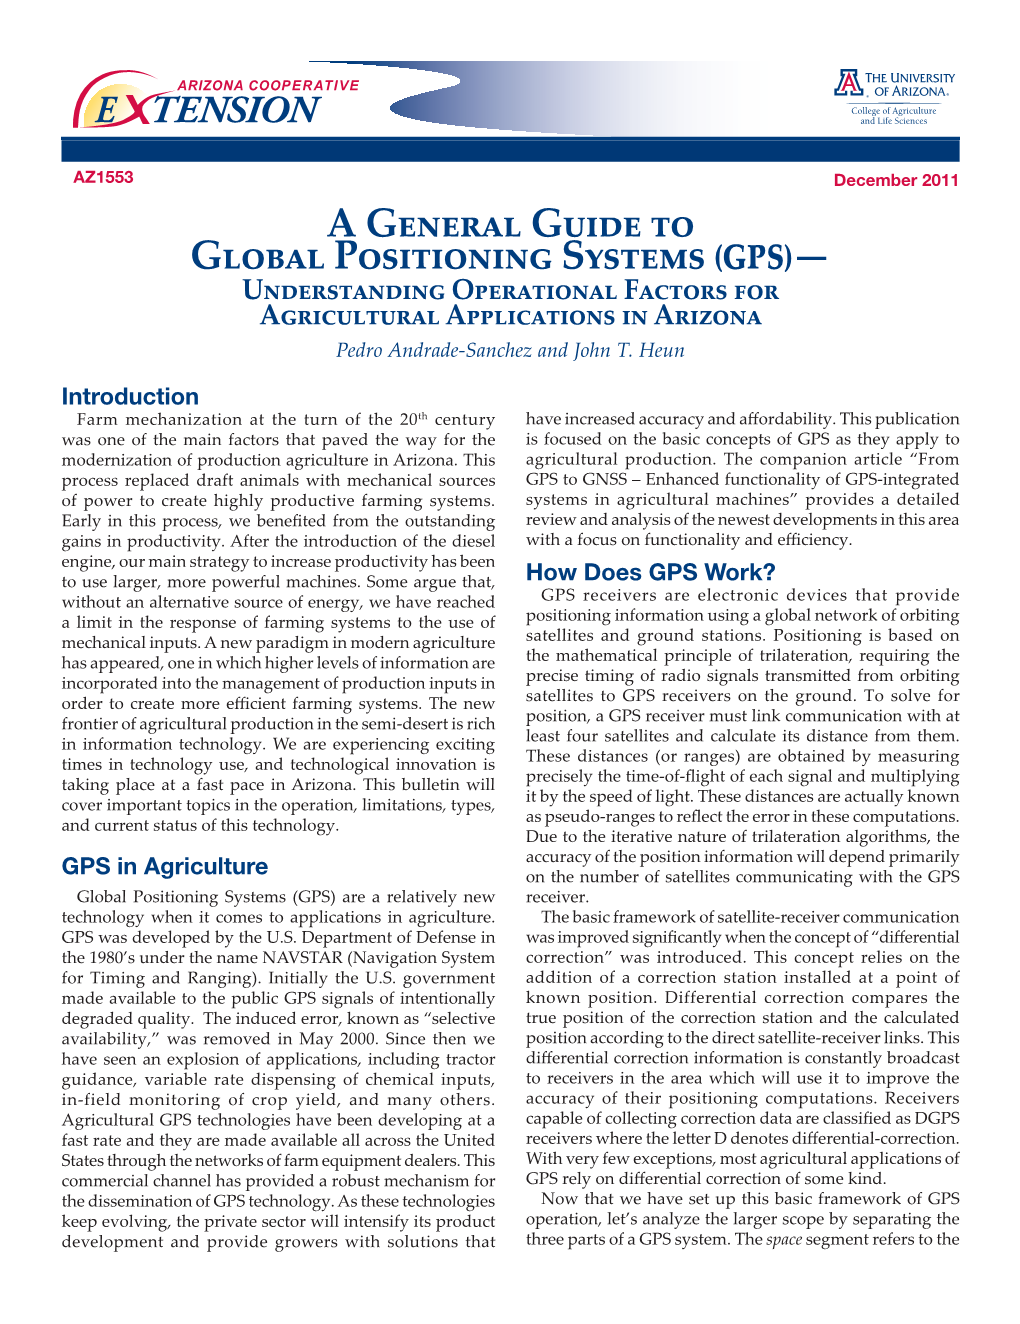 A General Guide to Global Positioning Systems (Gps)— Understanding Operational Factors for Agricultural Applications in Arizona Pedro Andrade-Sanchez and John T